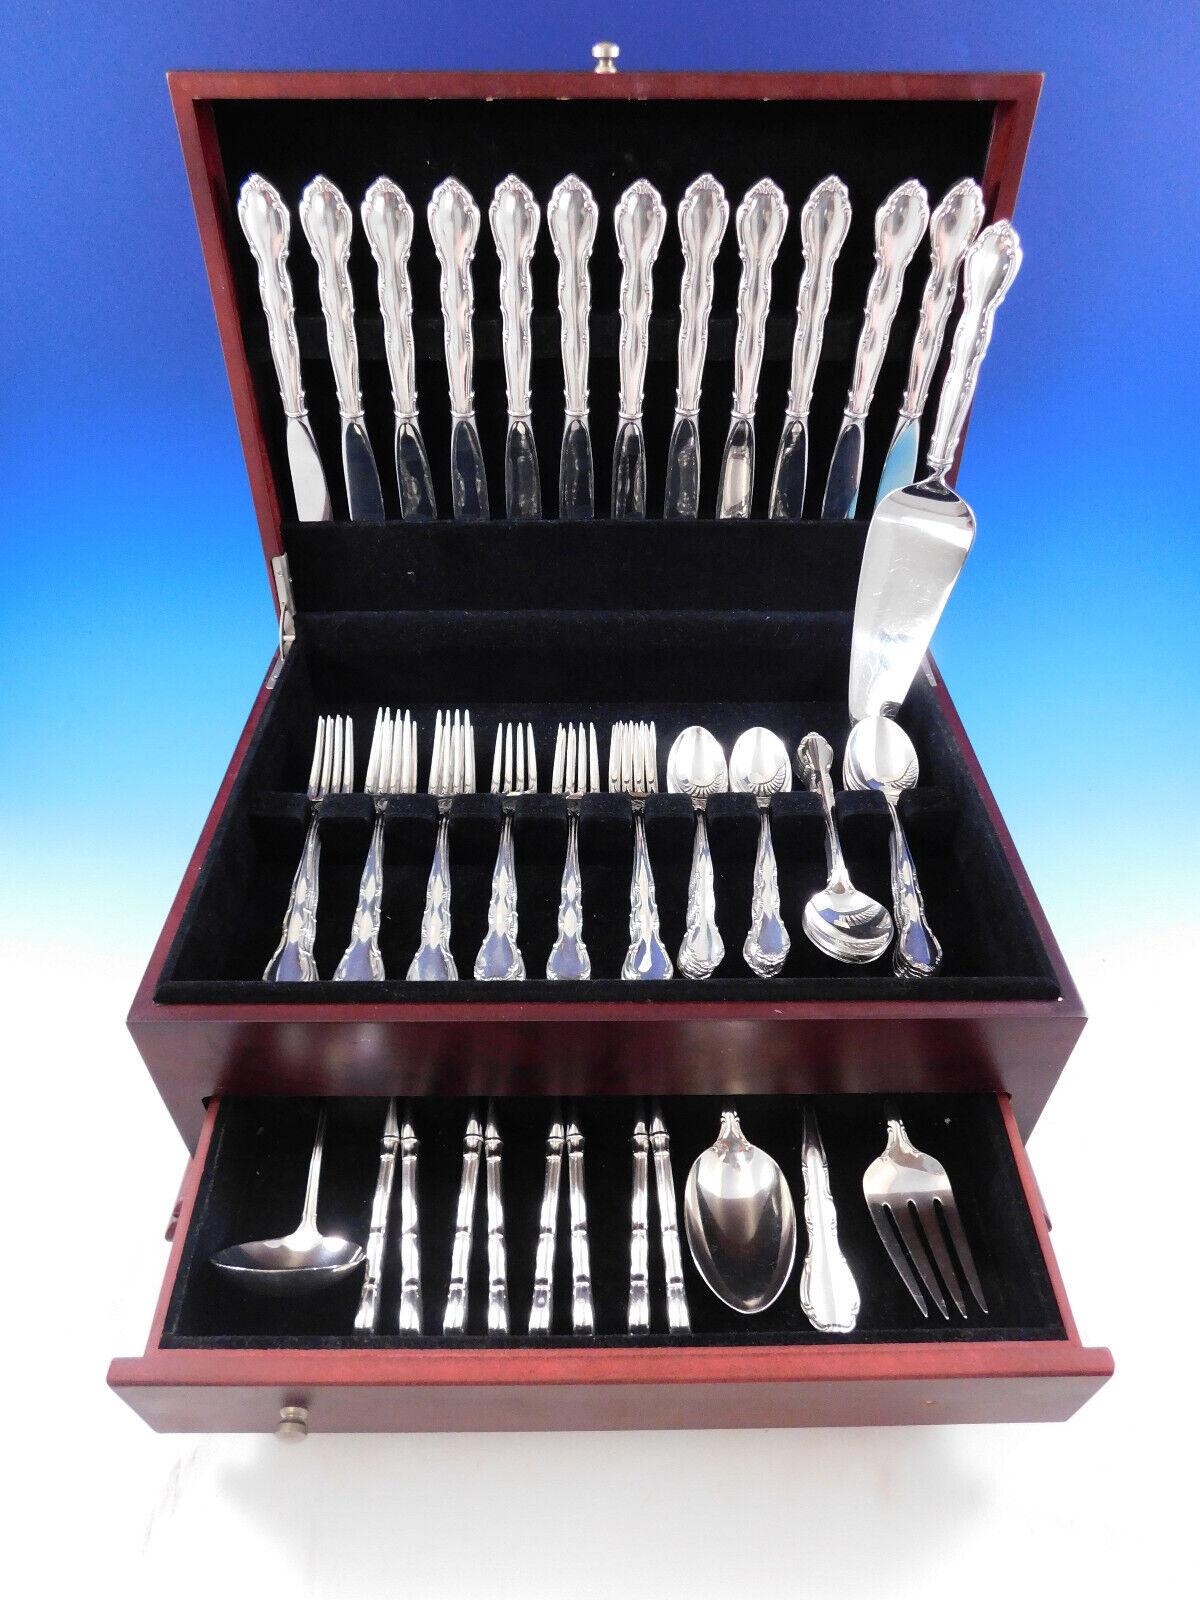 Andante by Gorham c1963 sterling silver Flatware set - 77 Pieces. This set includes:
12 Knives, 9 1/8